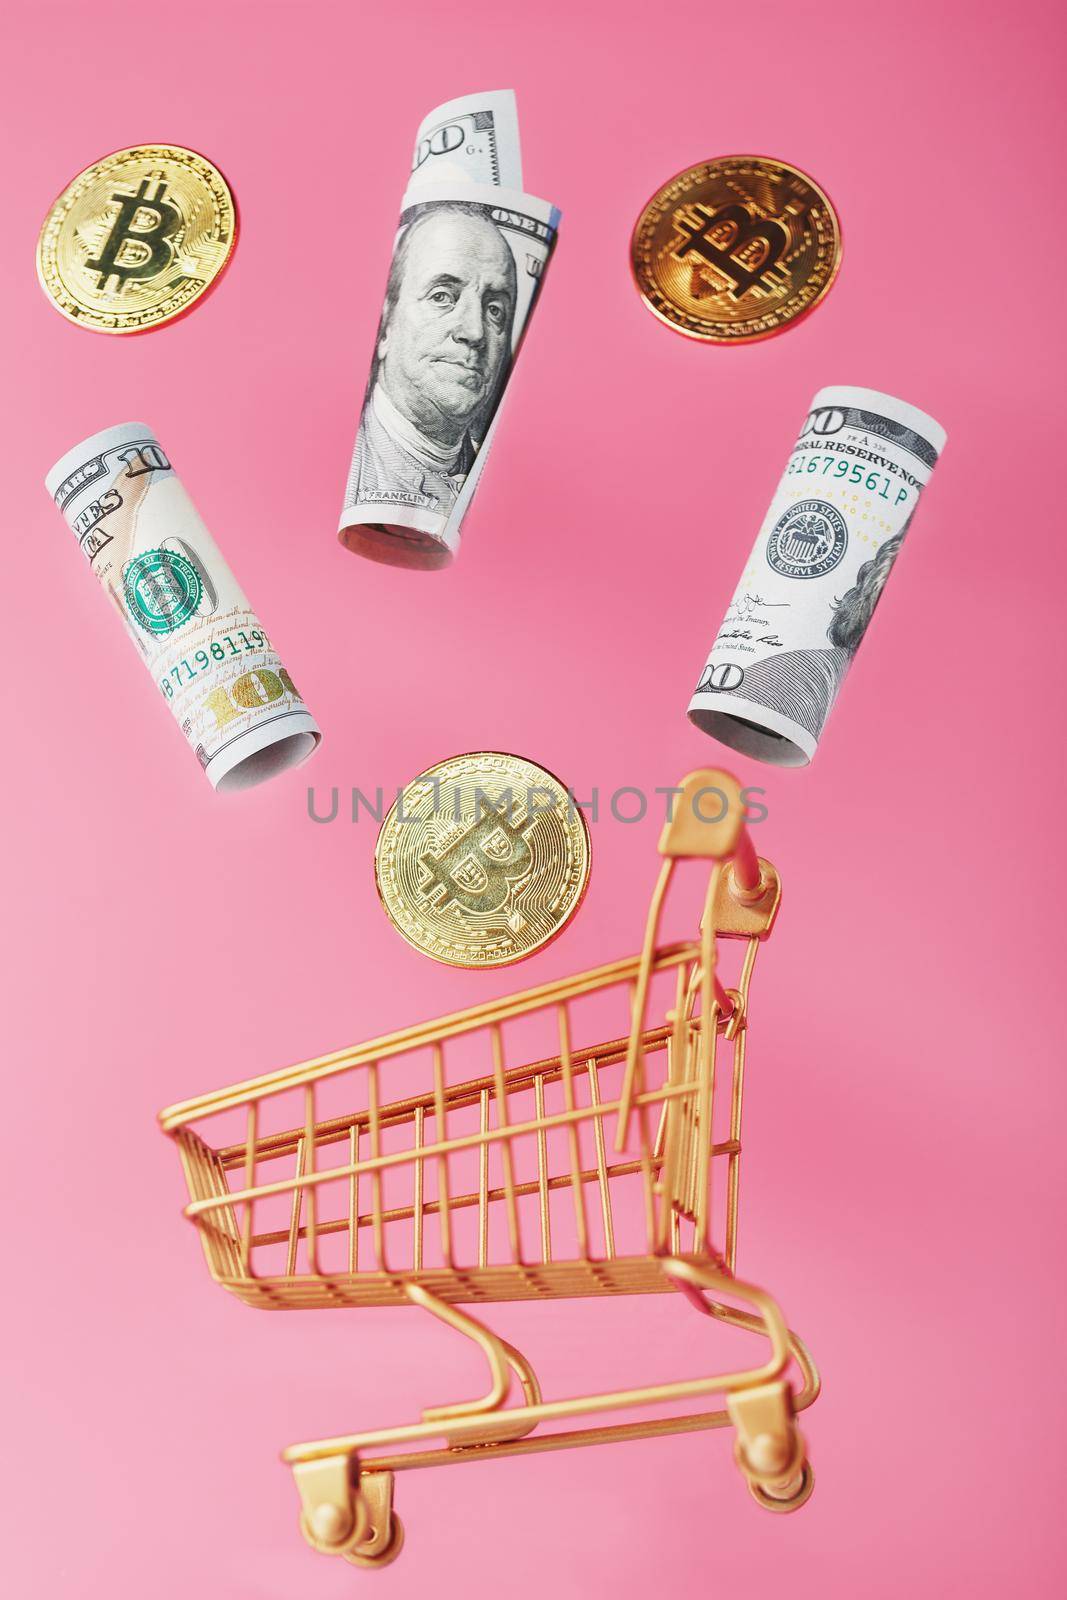 Dollar bills and itkon coins flew out of the Golden Basket on a pink background. Concept by AlexGrec